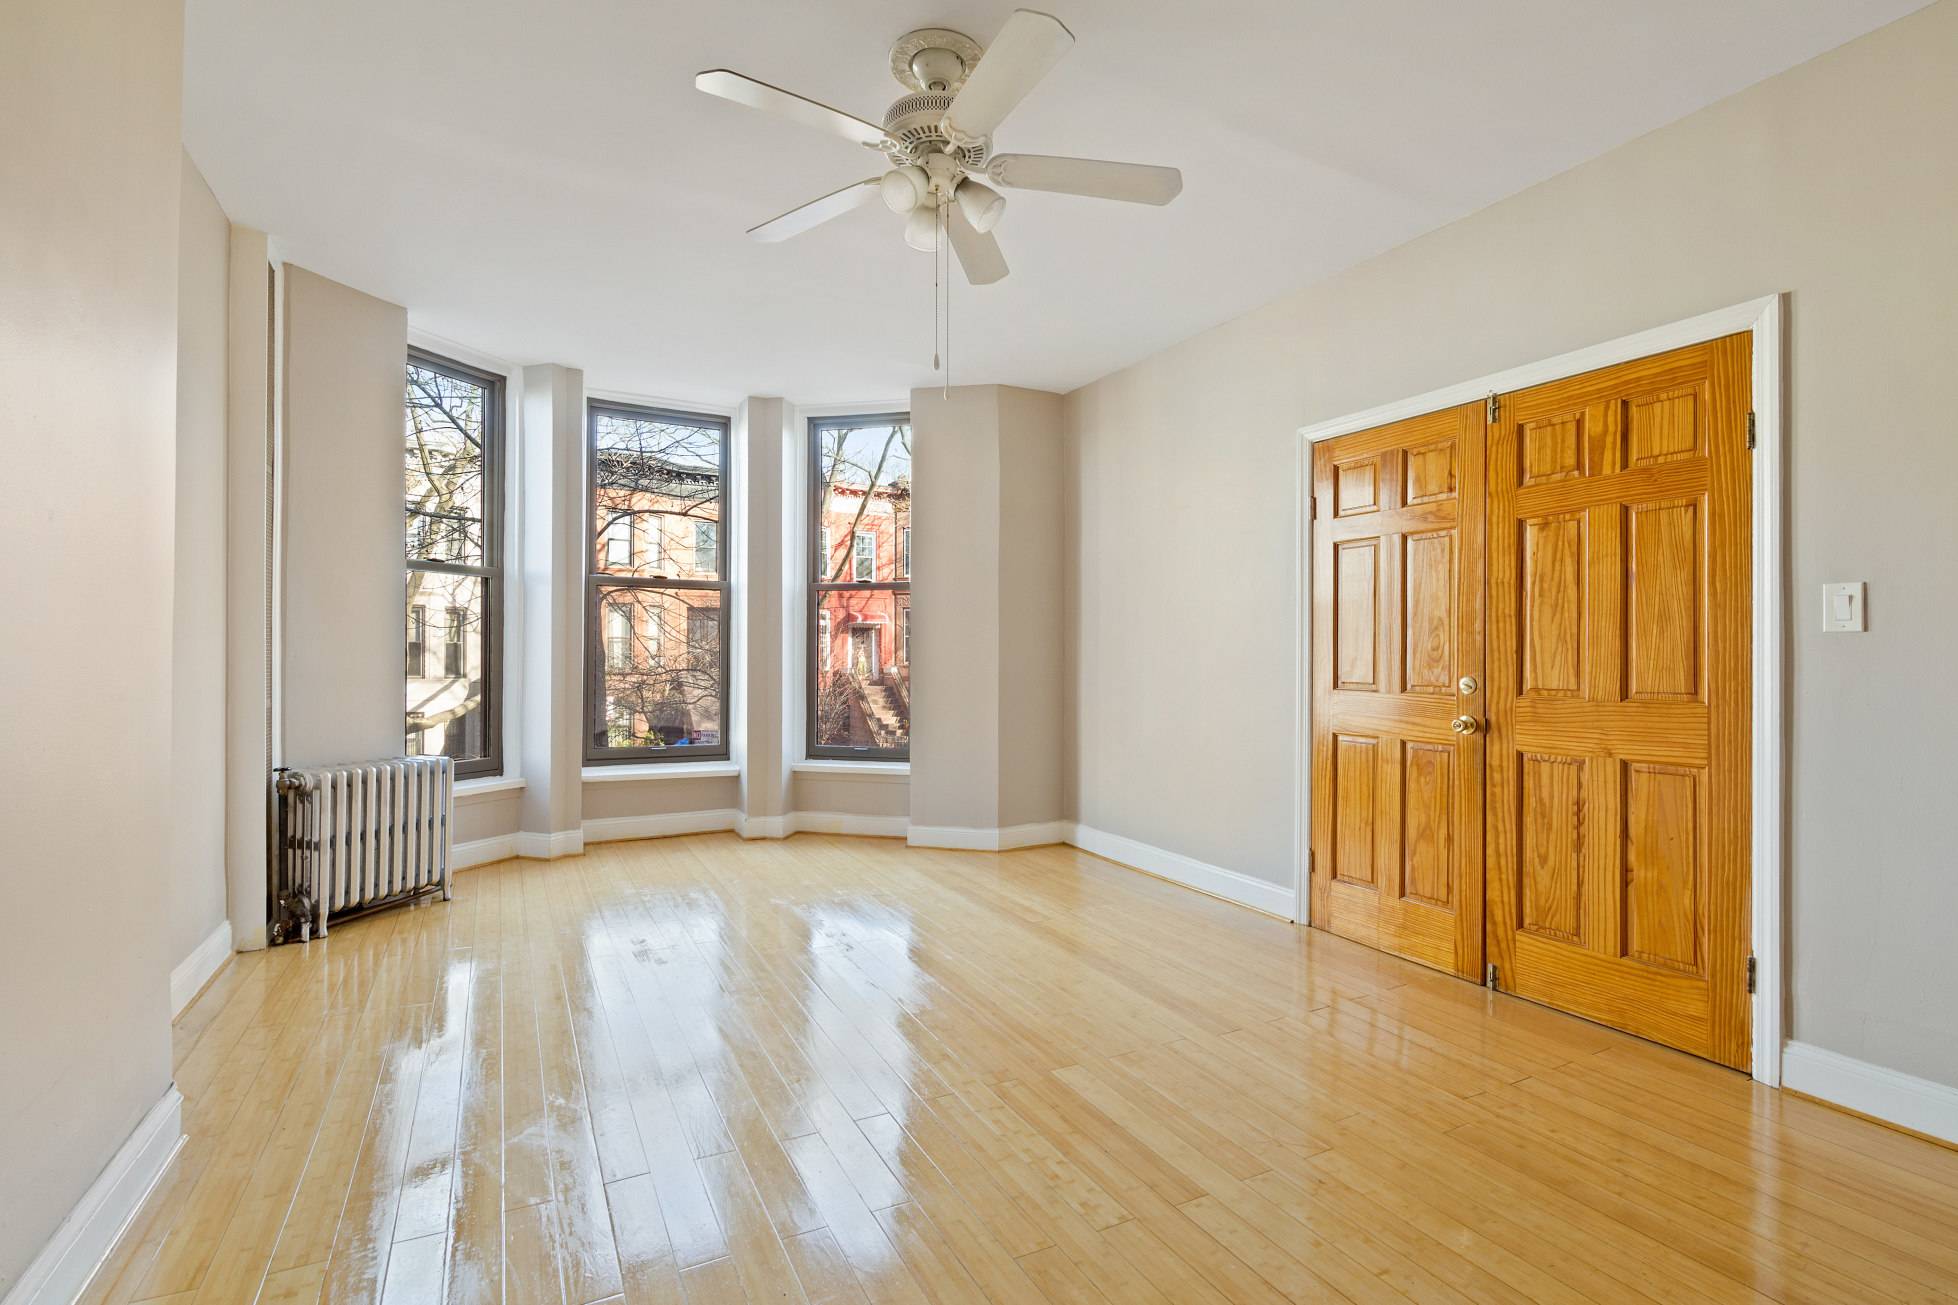 Spacious true two bedroom in this sun filled classic brownstone in historic Crown Heights.